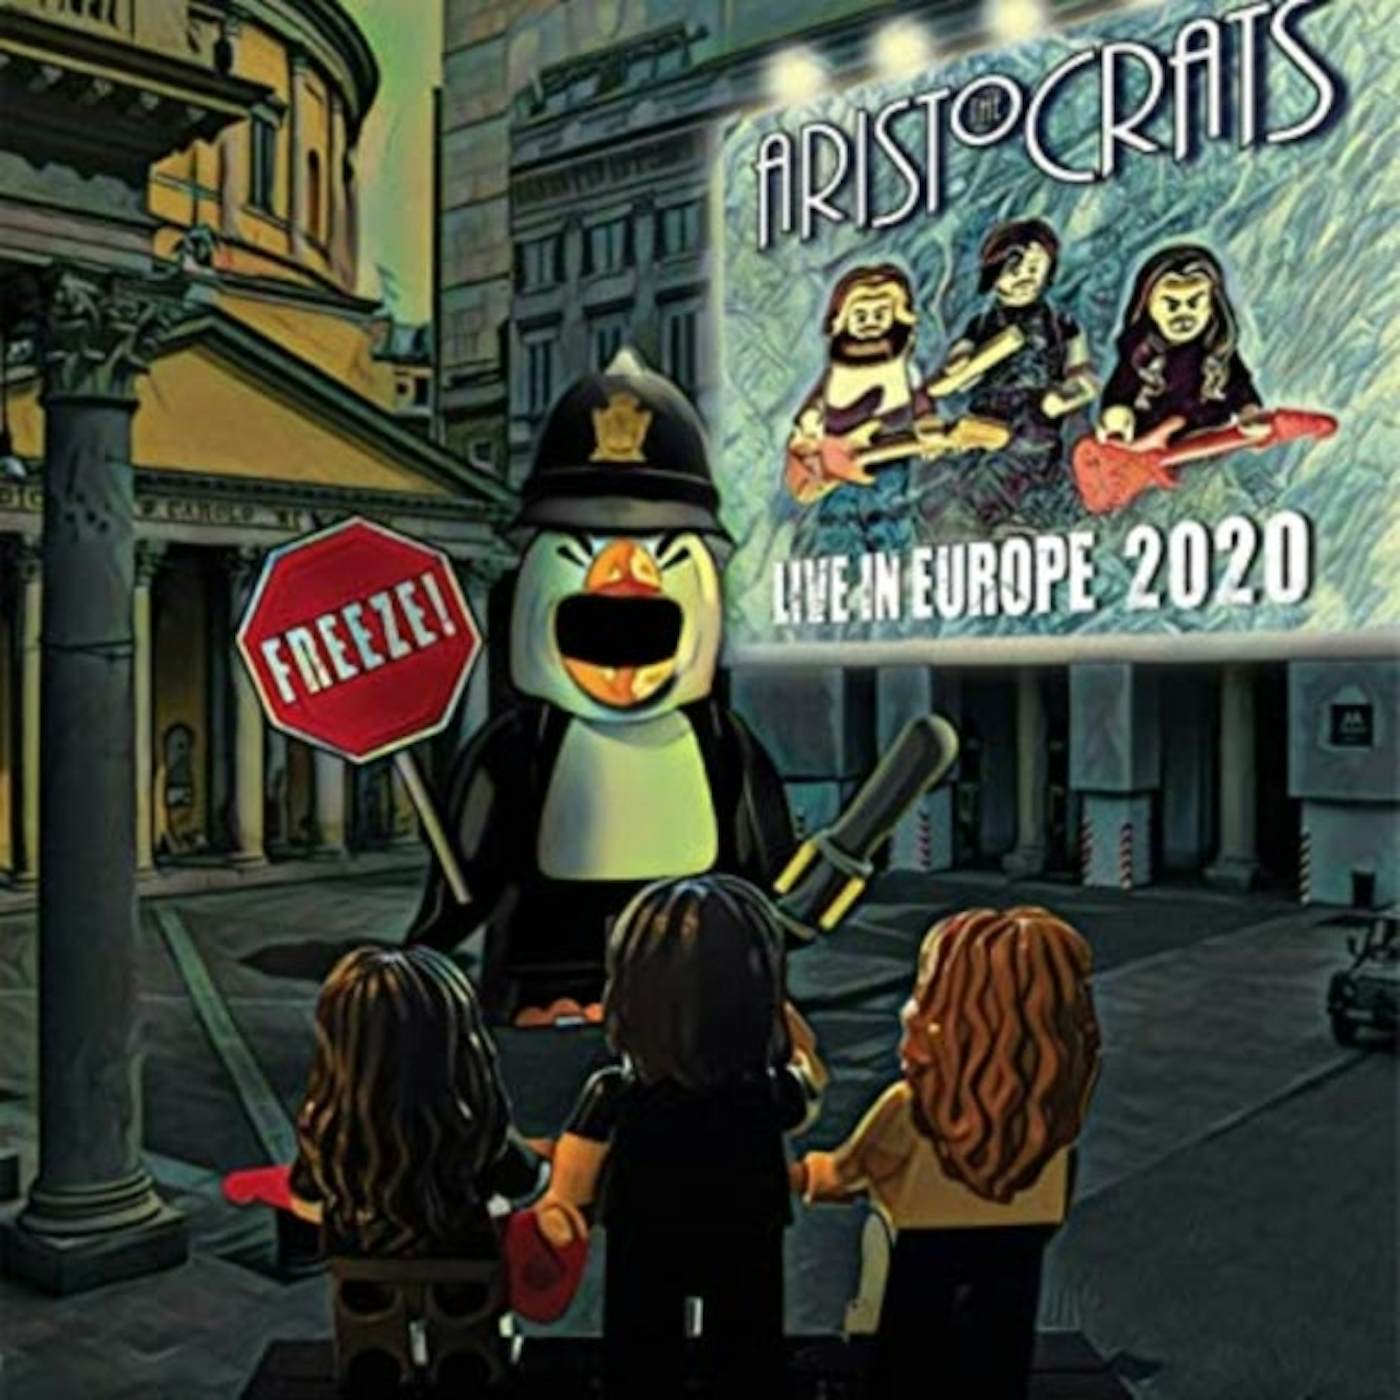 Aristocrats CD - Freeze! Live In Europe 2020